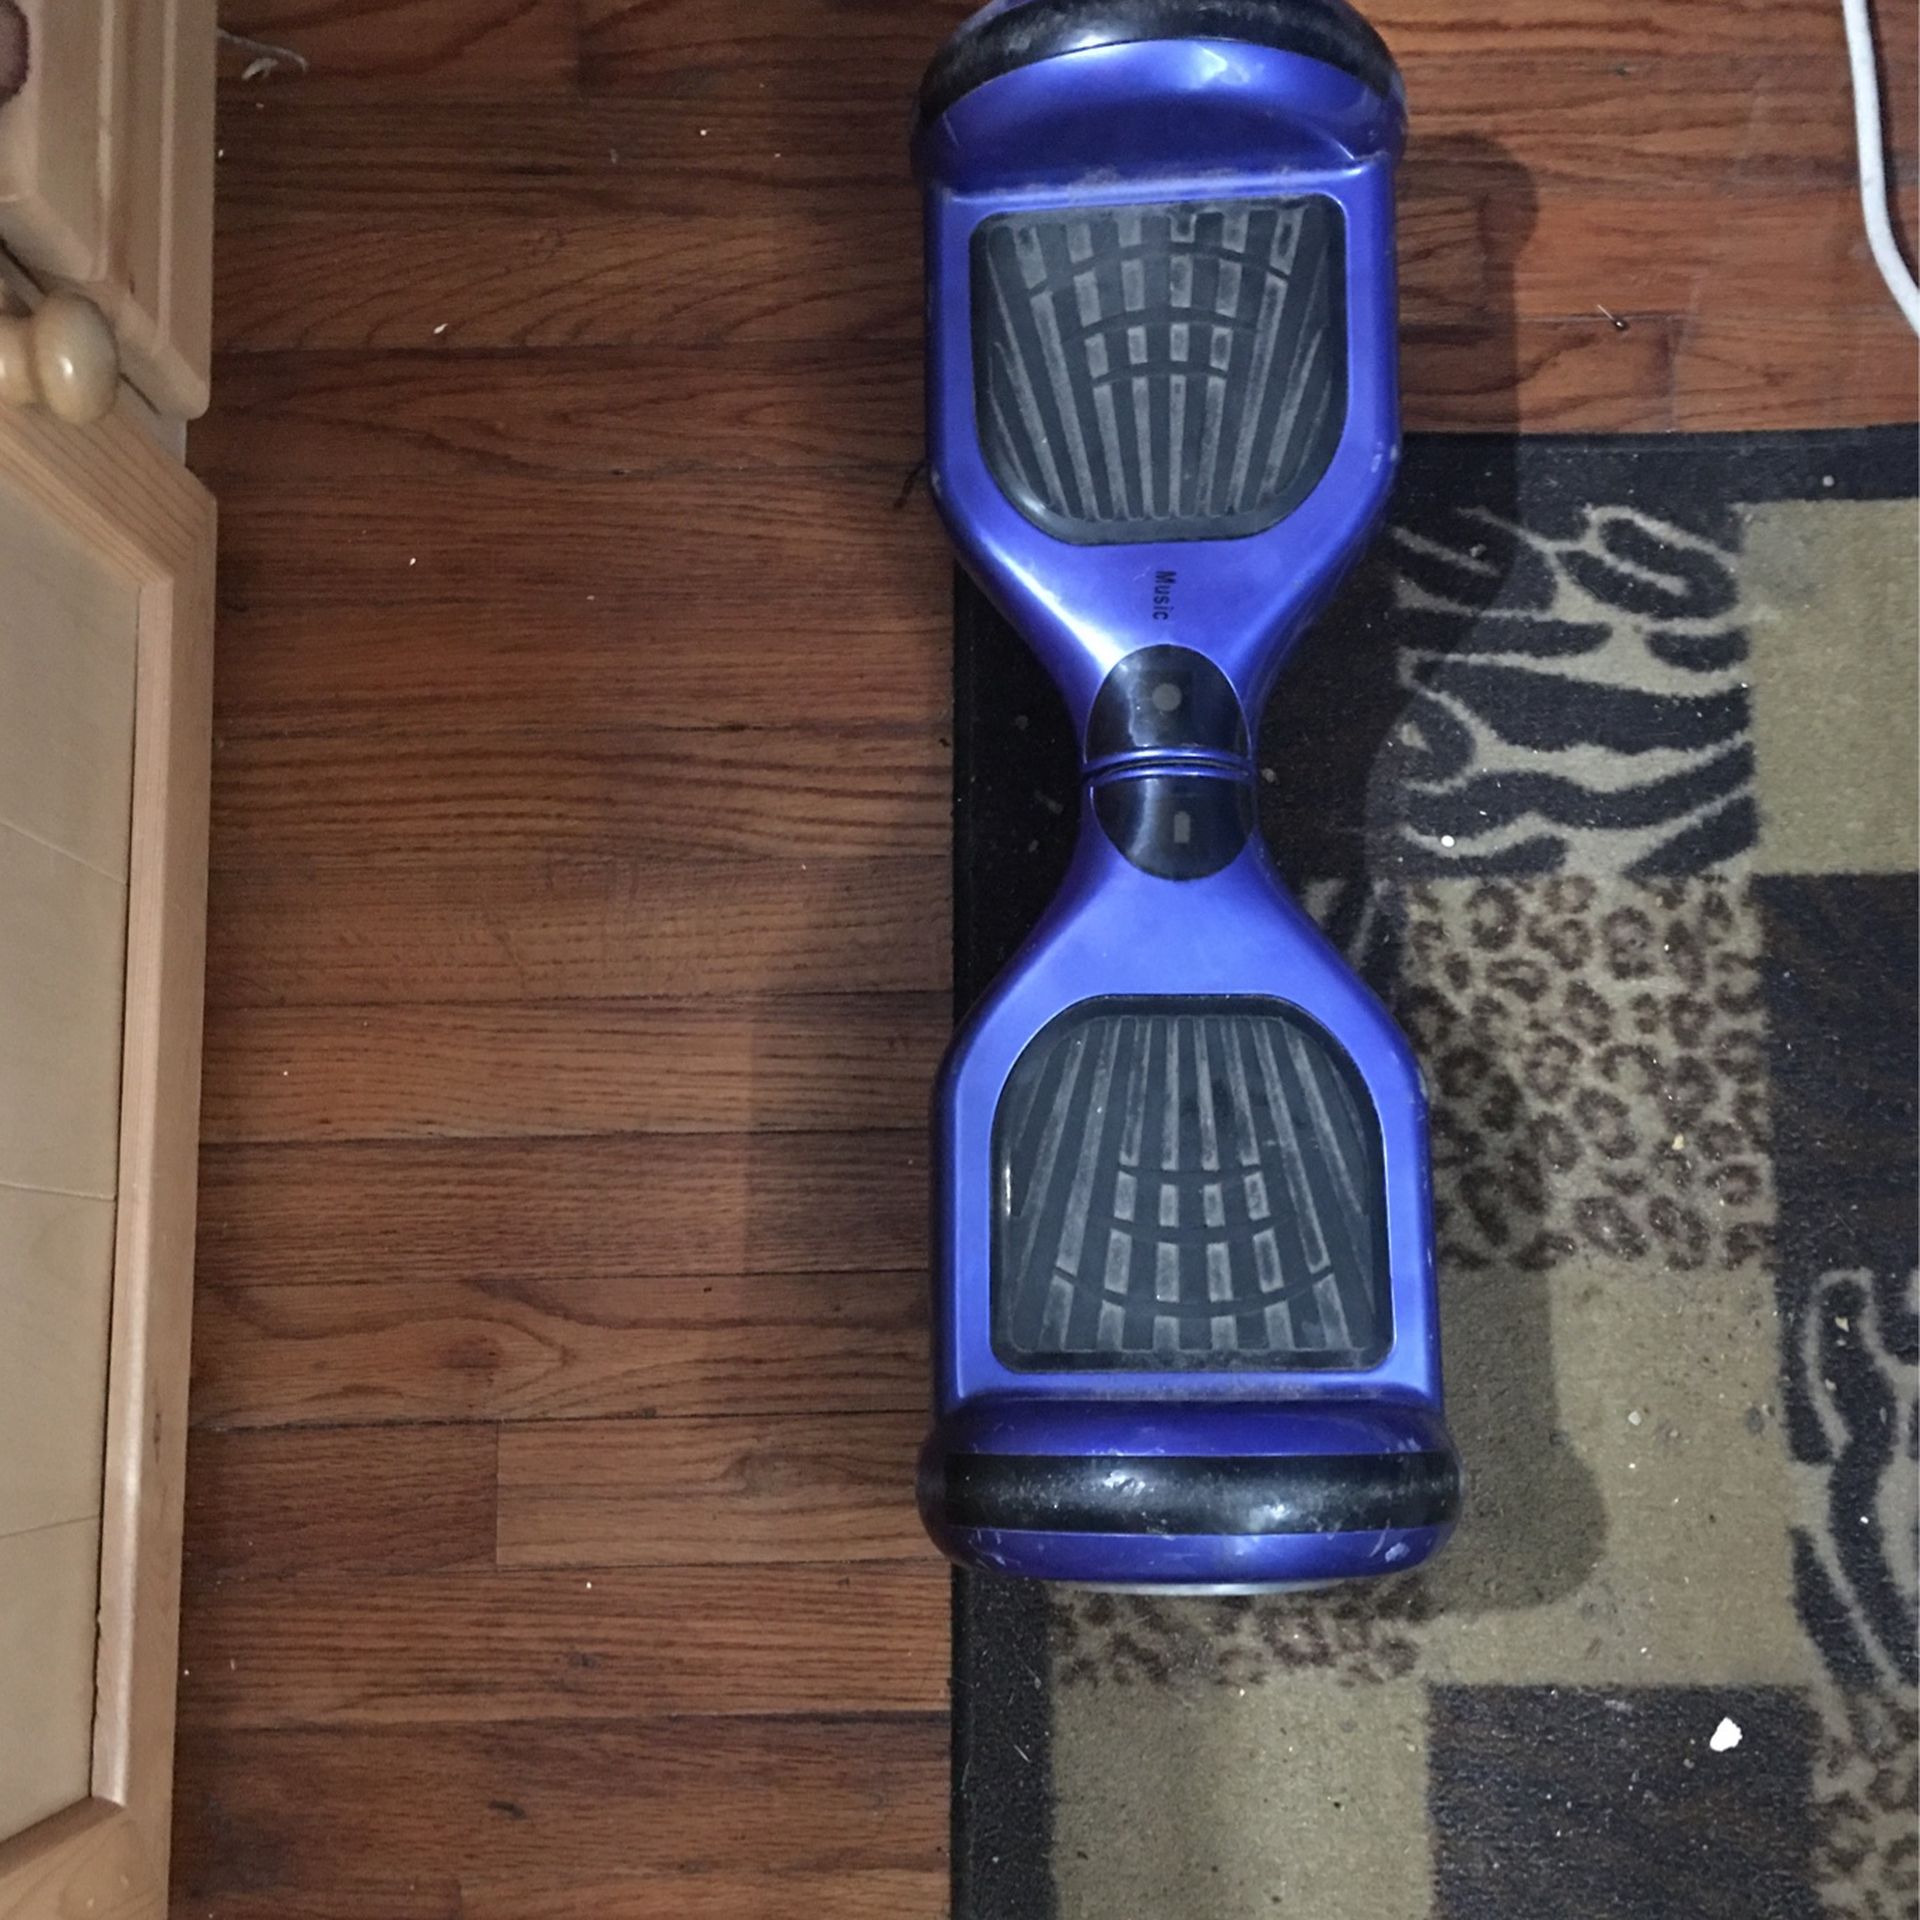 Bluetooth hoverboard 